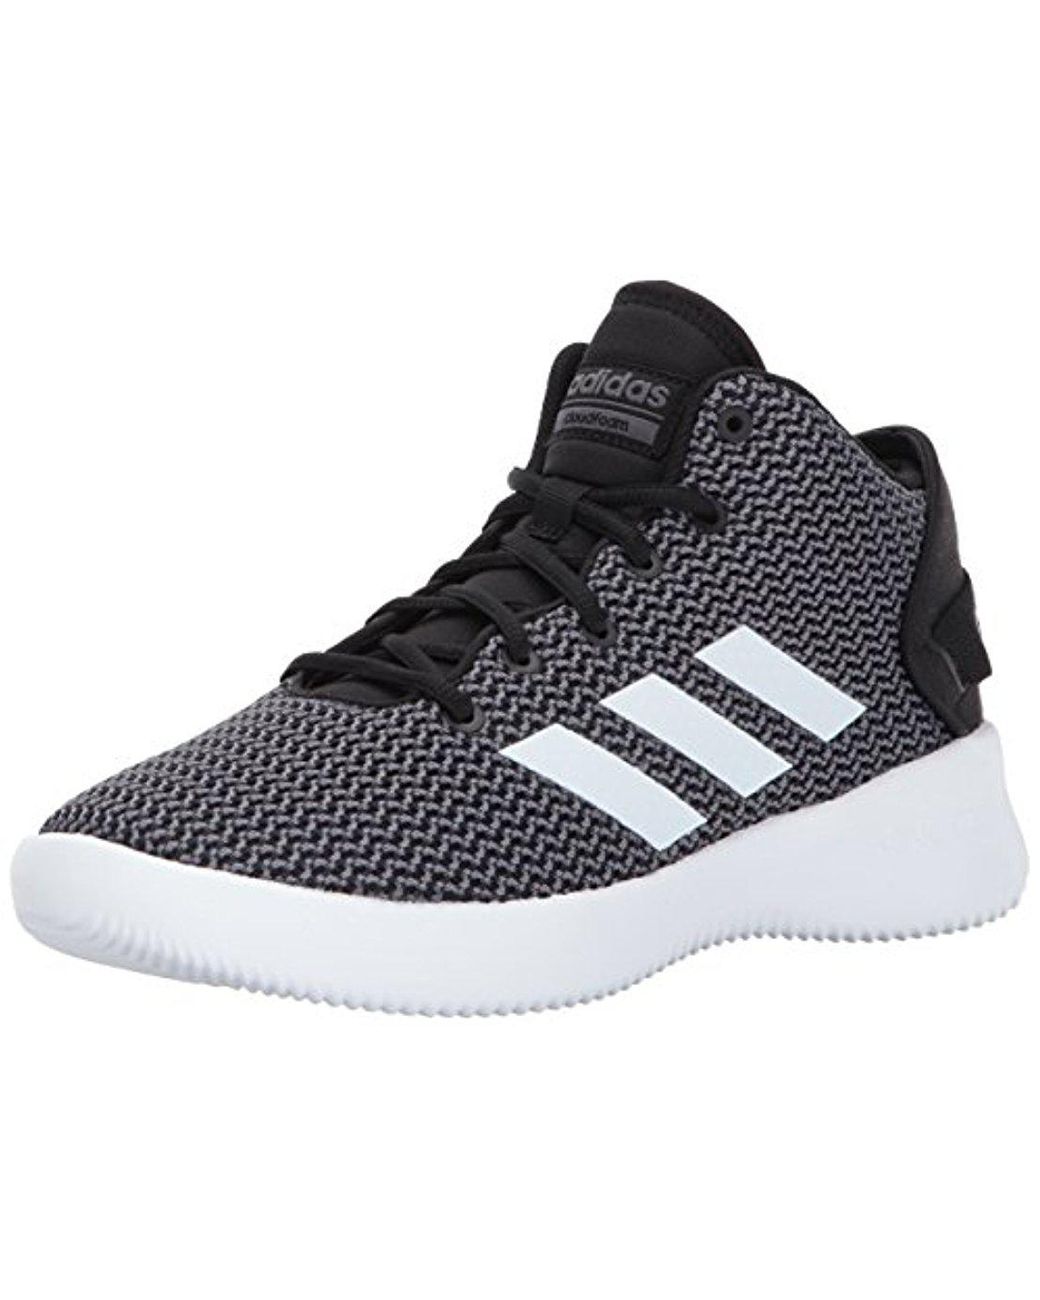 Farthest orchestra Self-respect adidas Neo Cf Refresh Mid Basketball-shoes, Black/white/grey Five, 7 Medium  Us for Men | Lyst